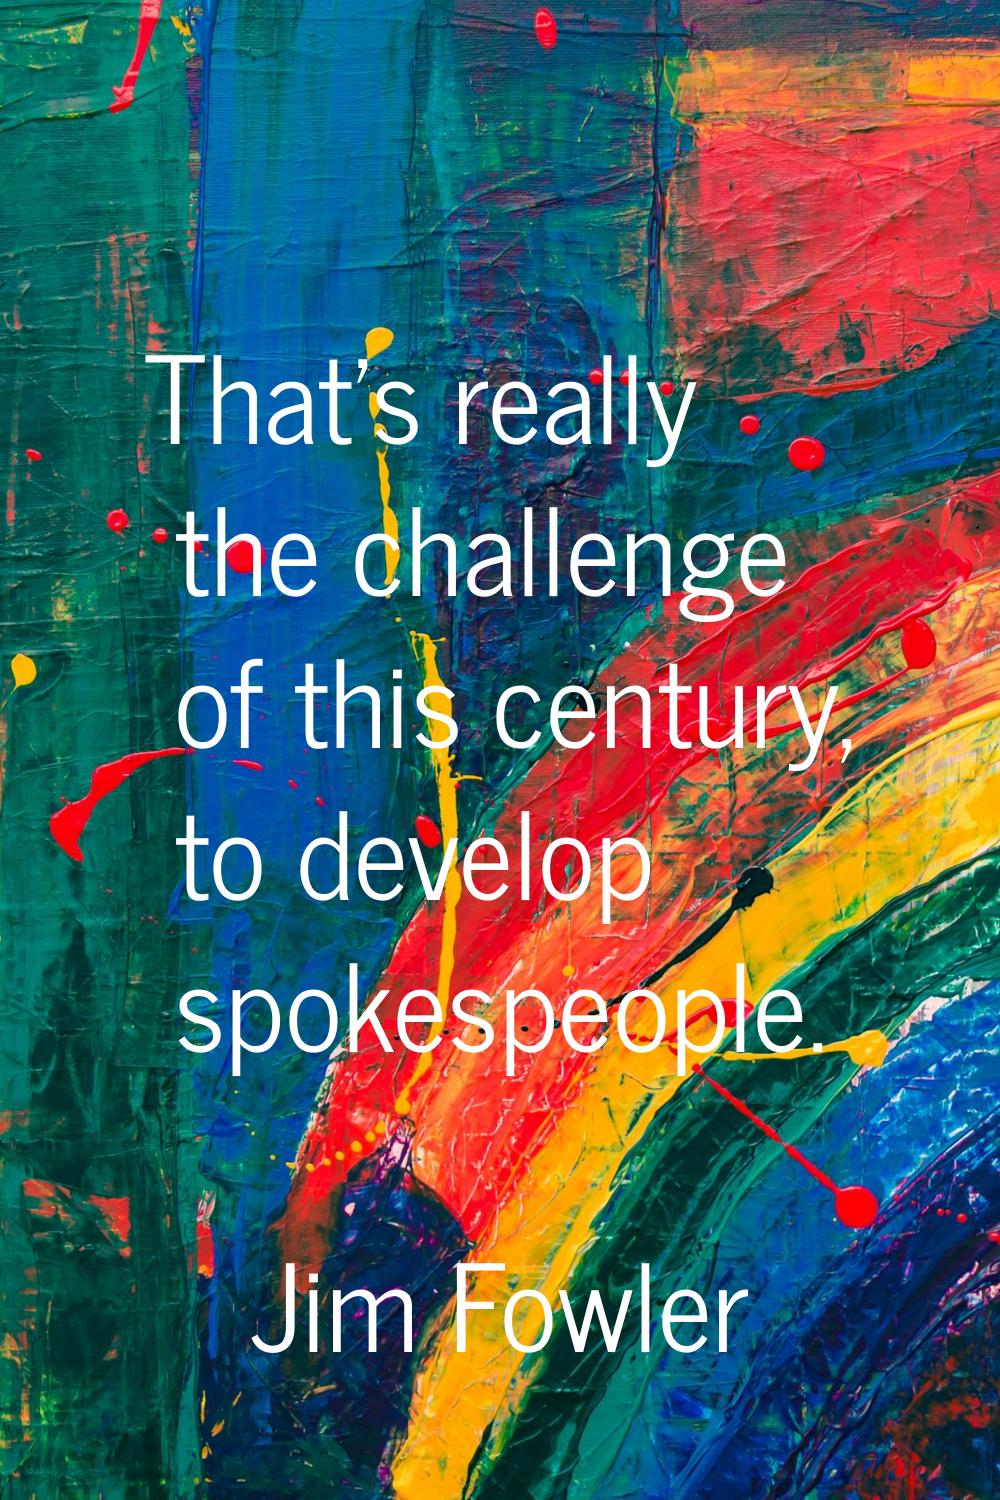 That's really the challenge of this century, to develop spokespeople.